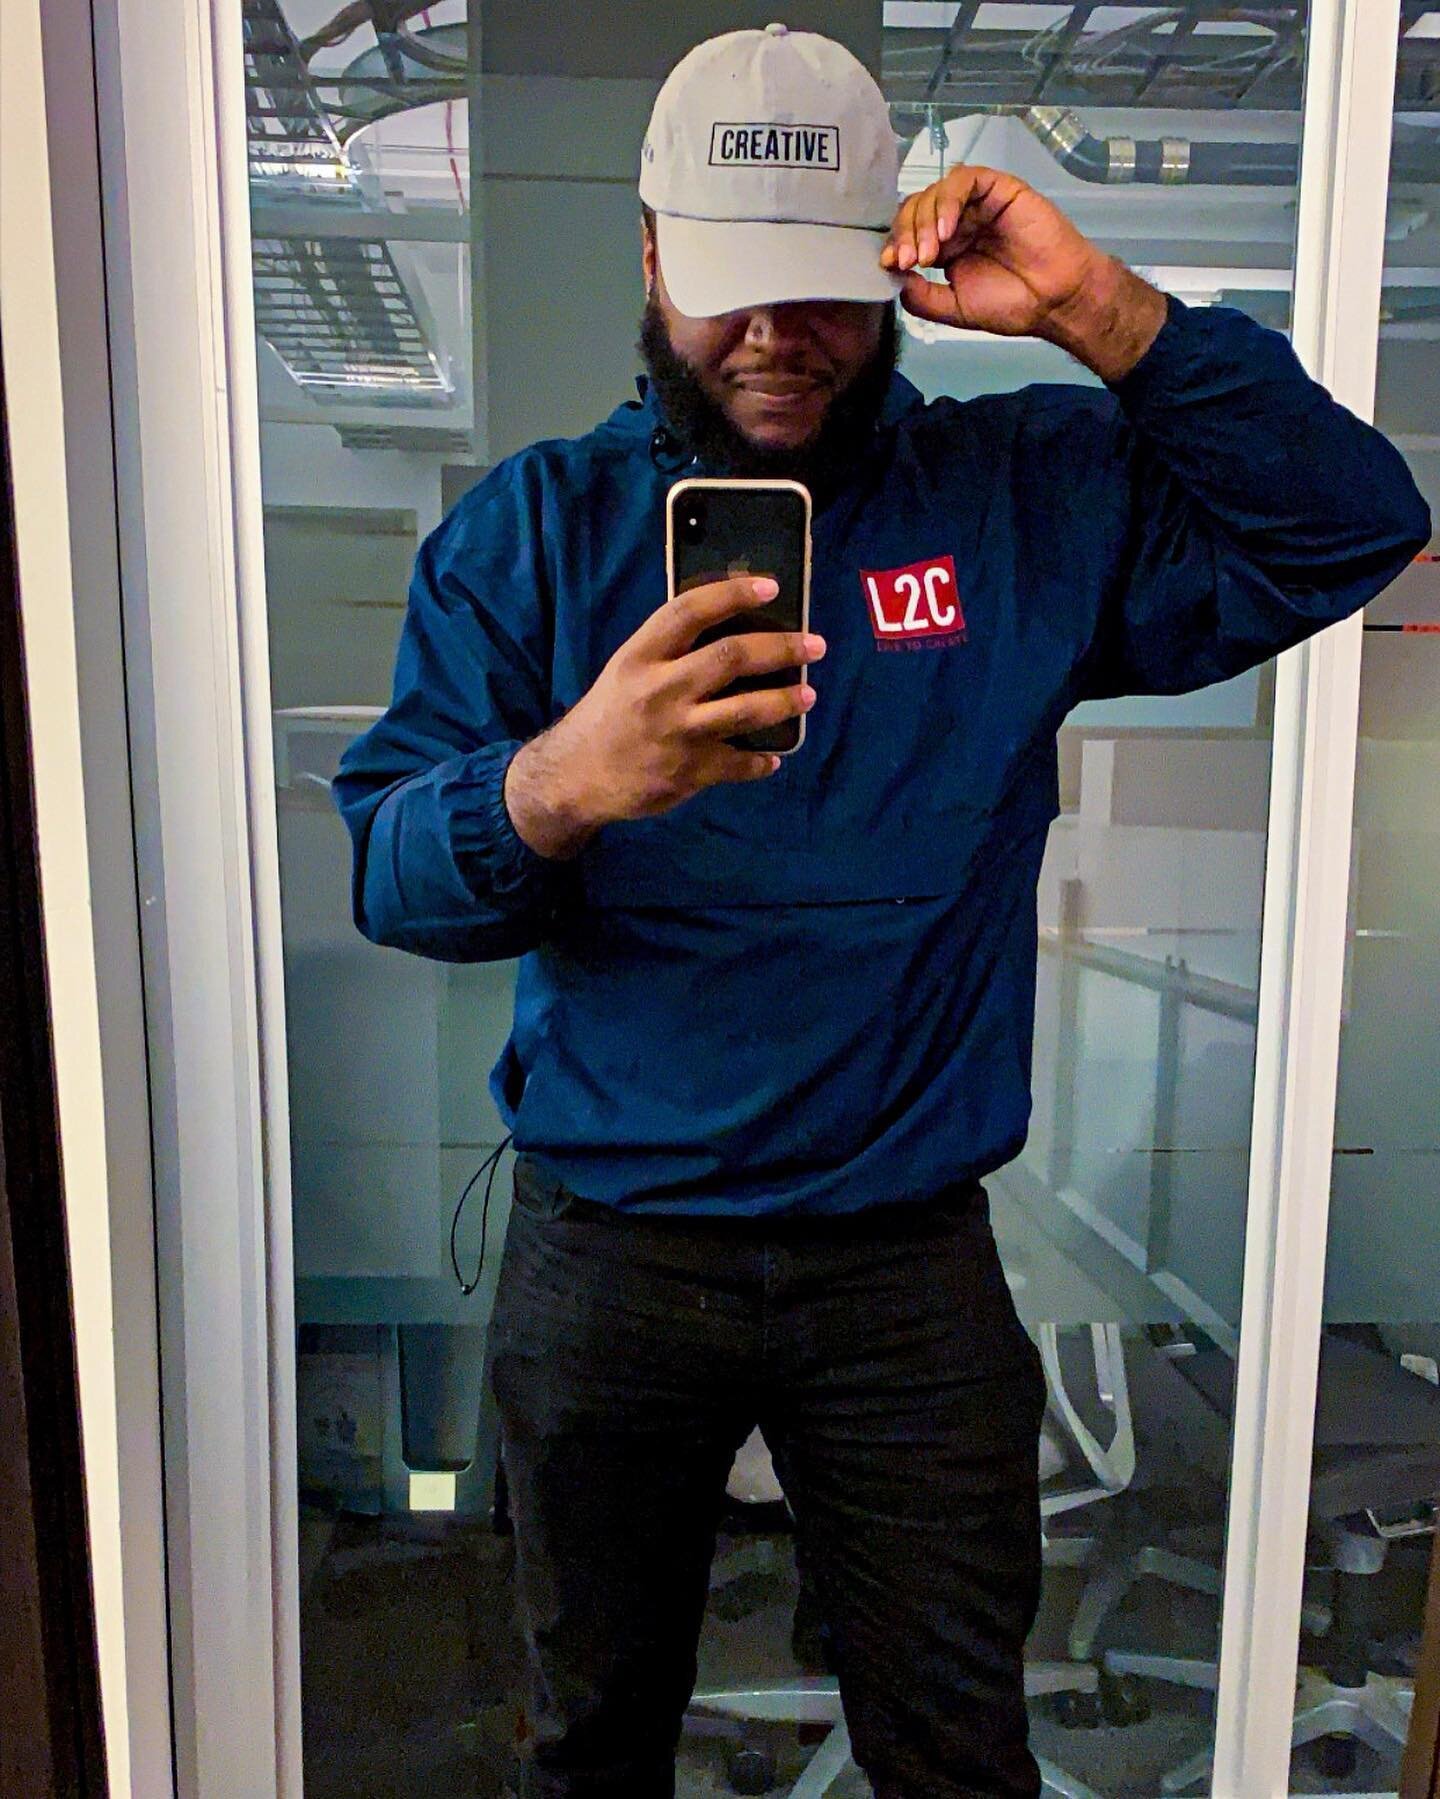 Founder @l2c_ceo showing off our Varsity Windbreaker and  Creative Dad hat coming this spring!